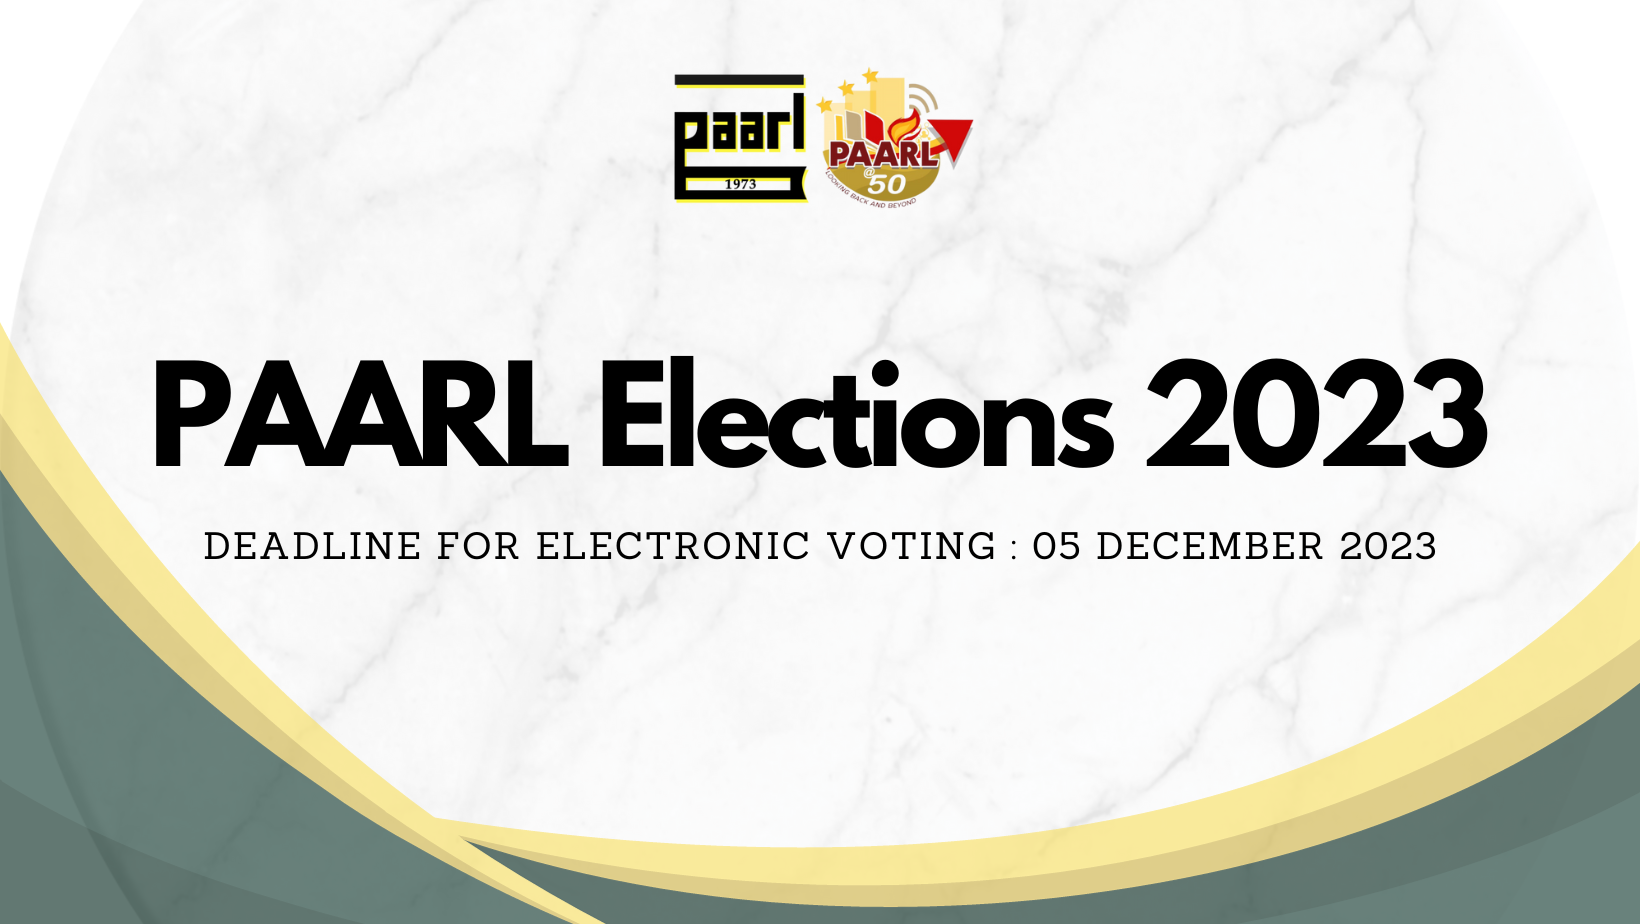 PAARL Elections 2023